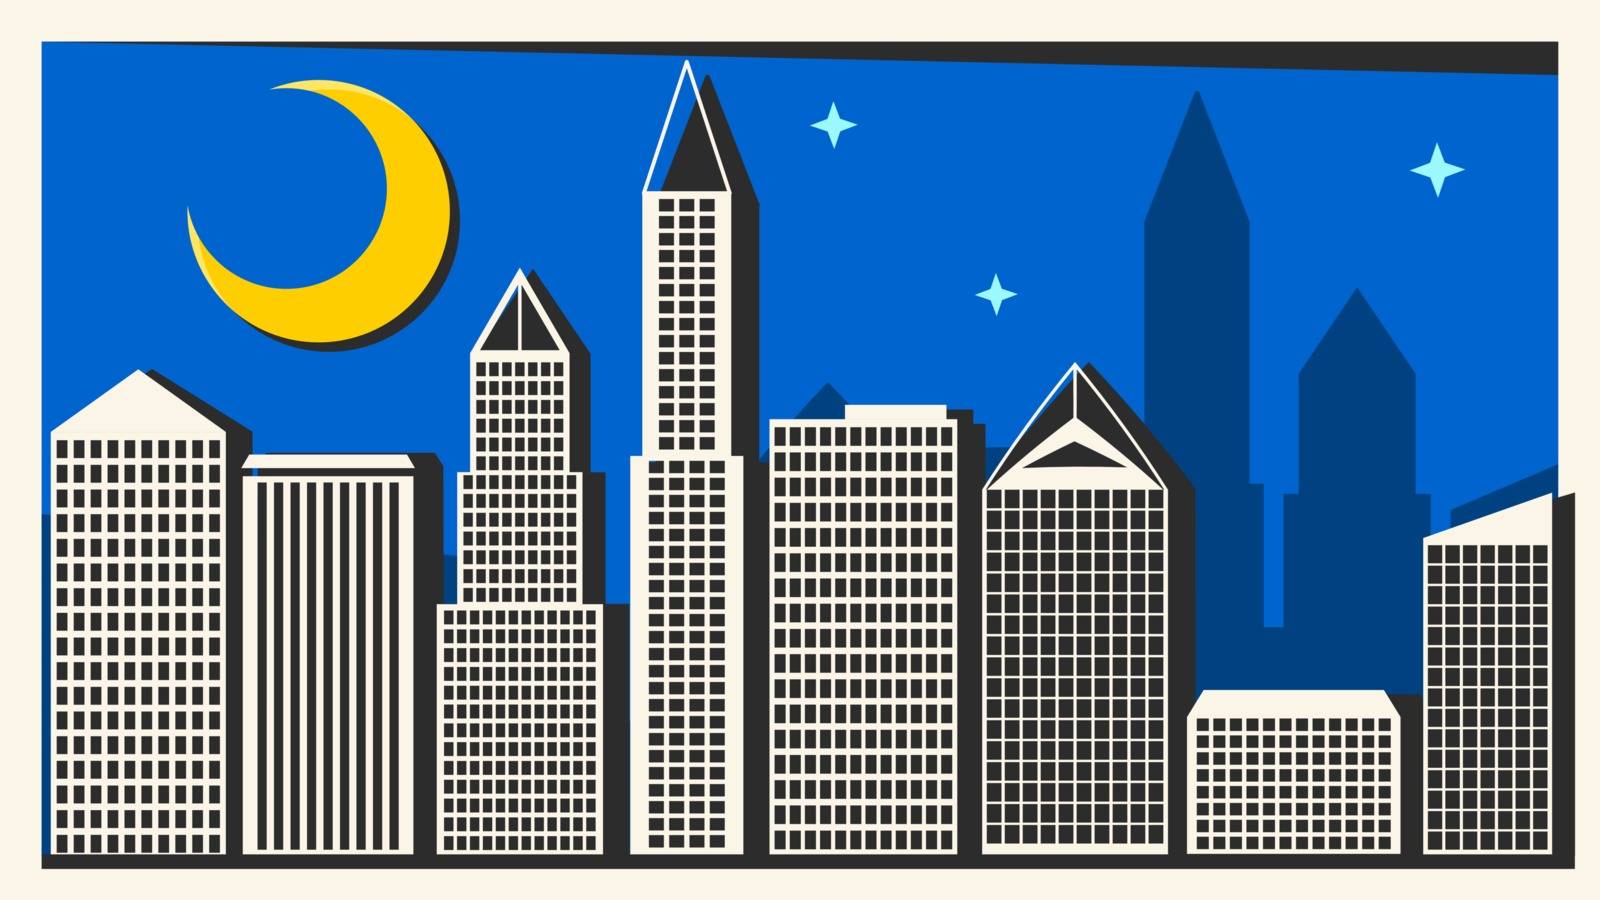 Big City With Skyscrapers Vector Illustration For Your Design And Needs